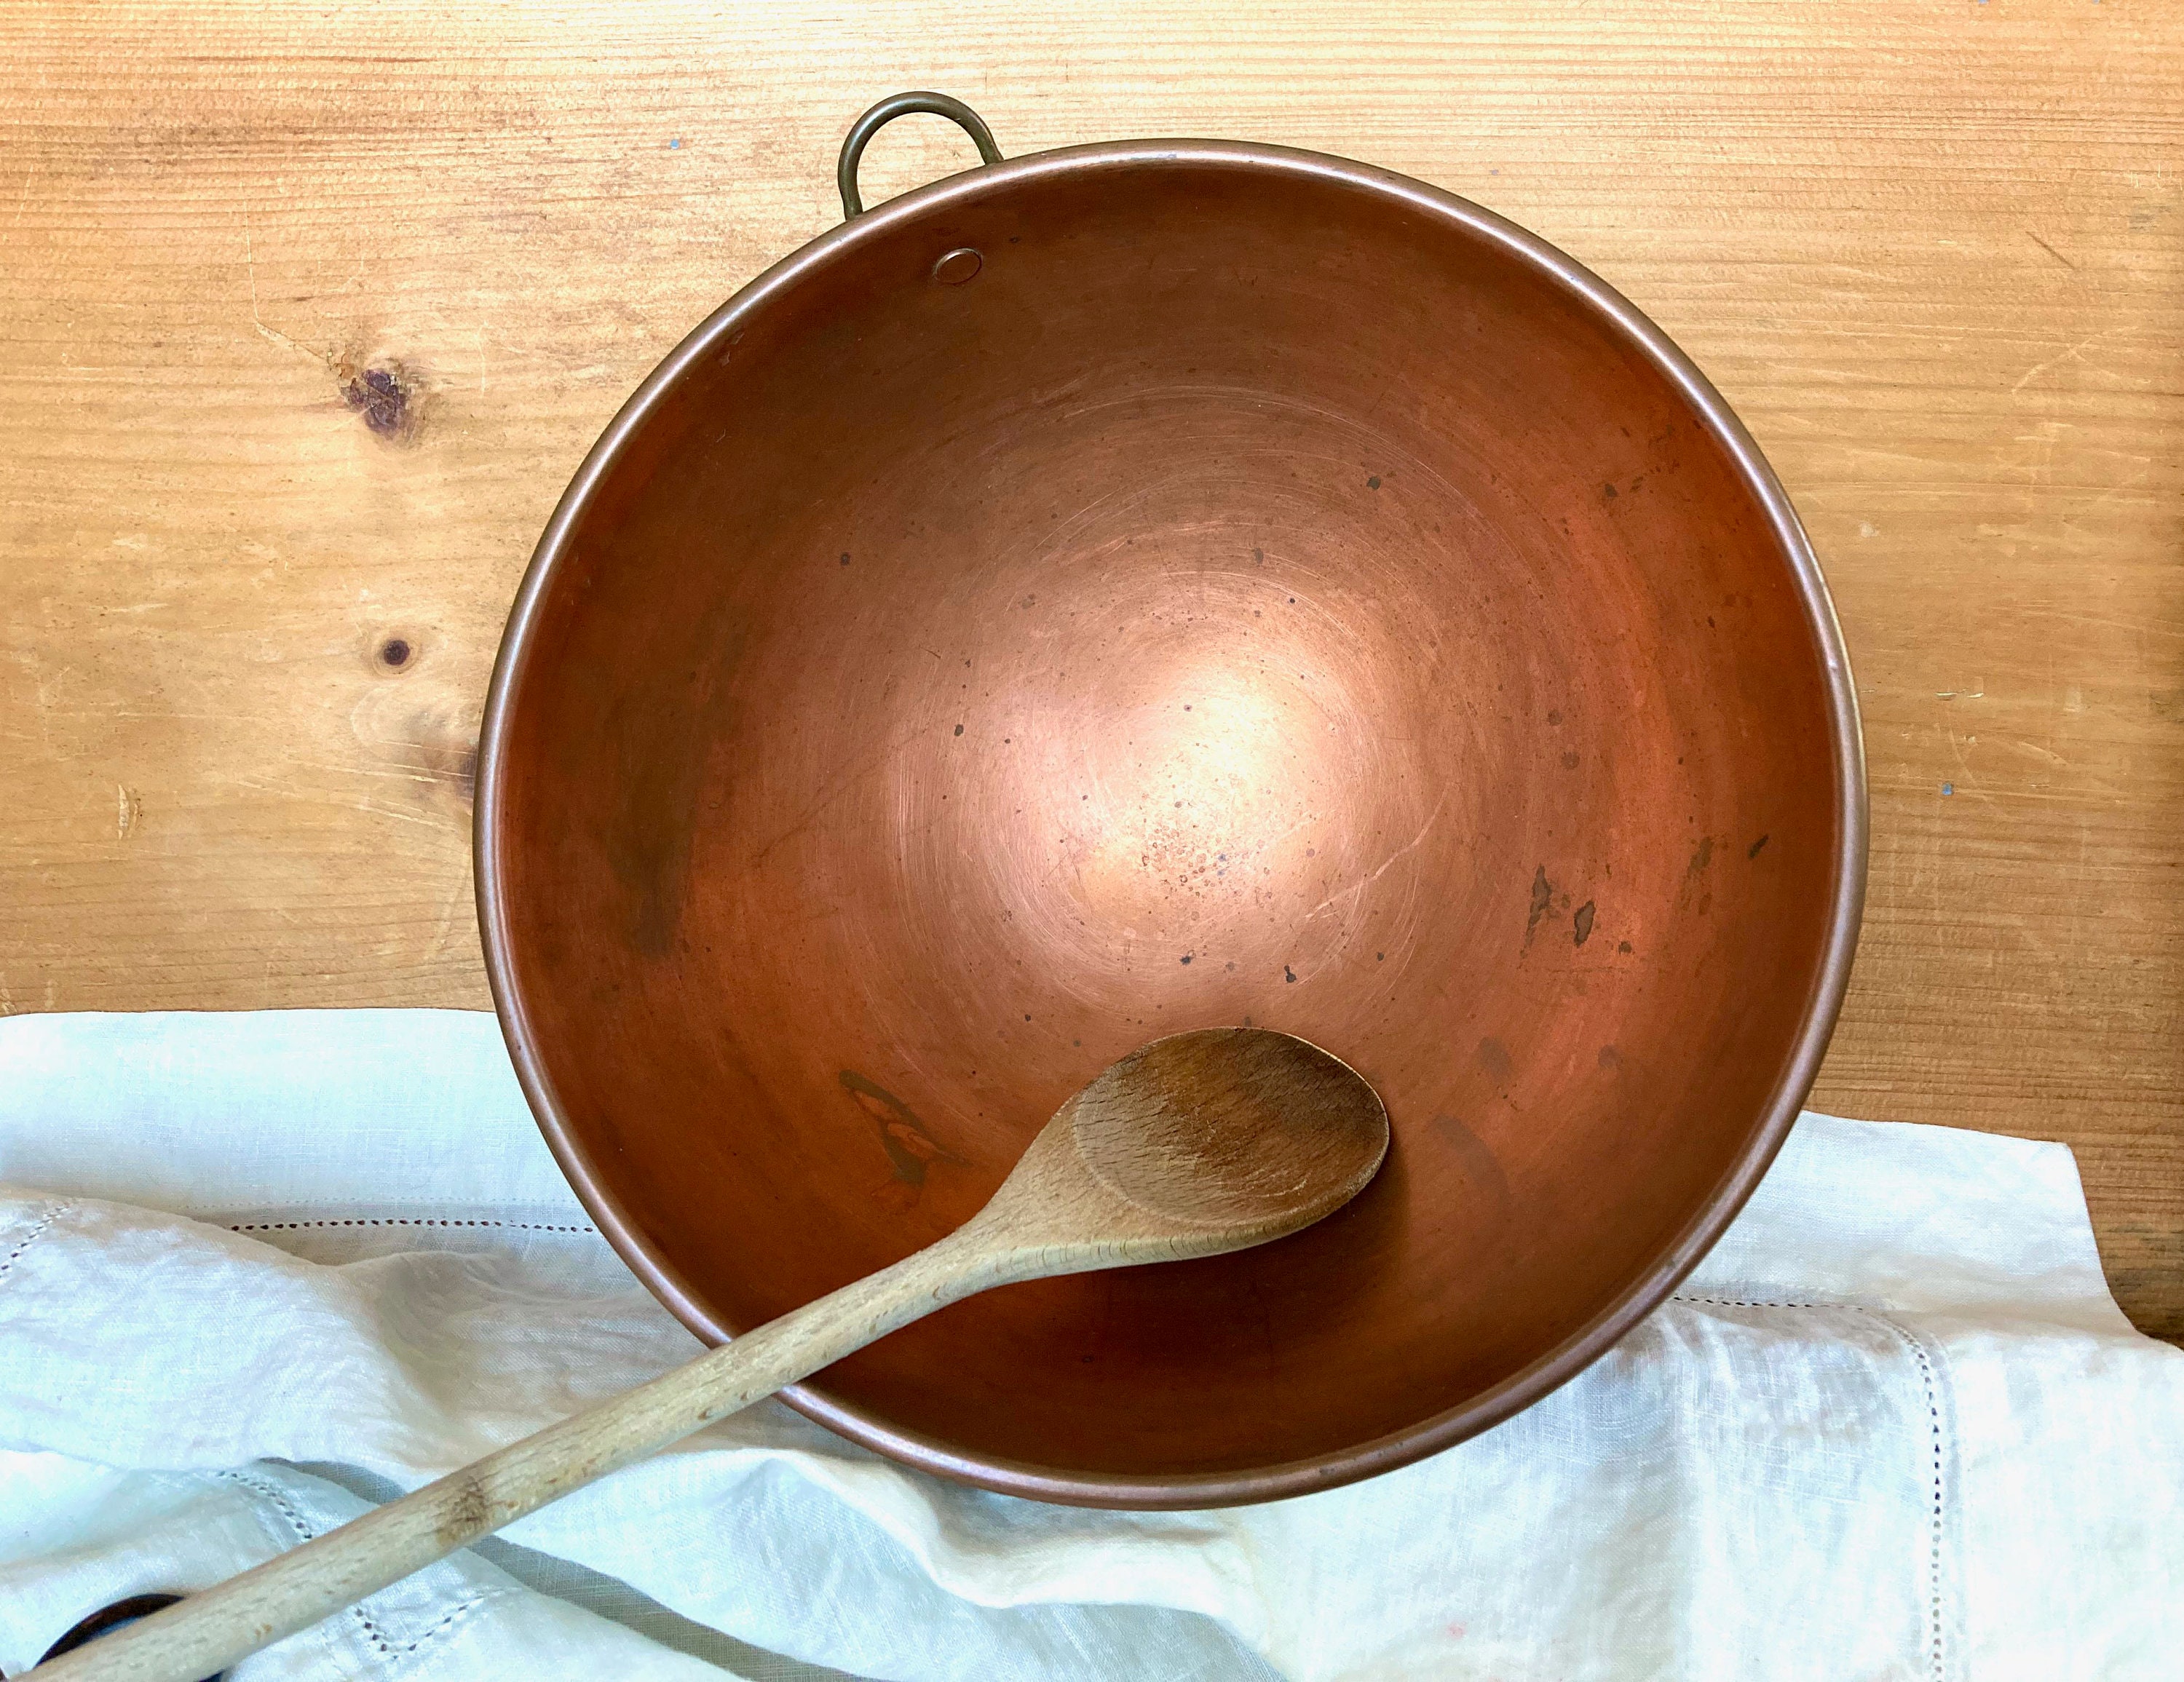 Vintage 1980s Copper Mixing Bowl With Brass Hanging Ring, Retro